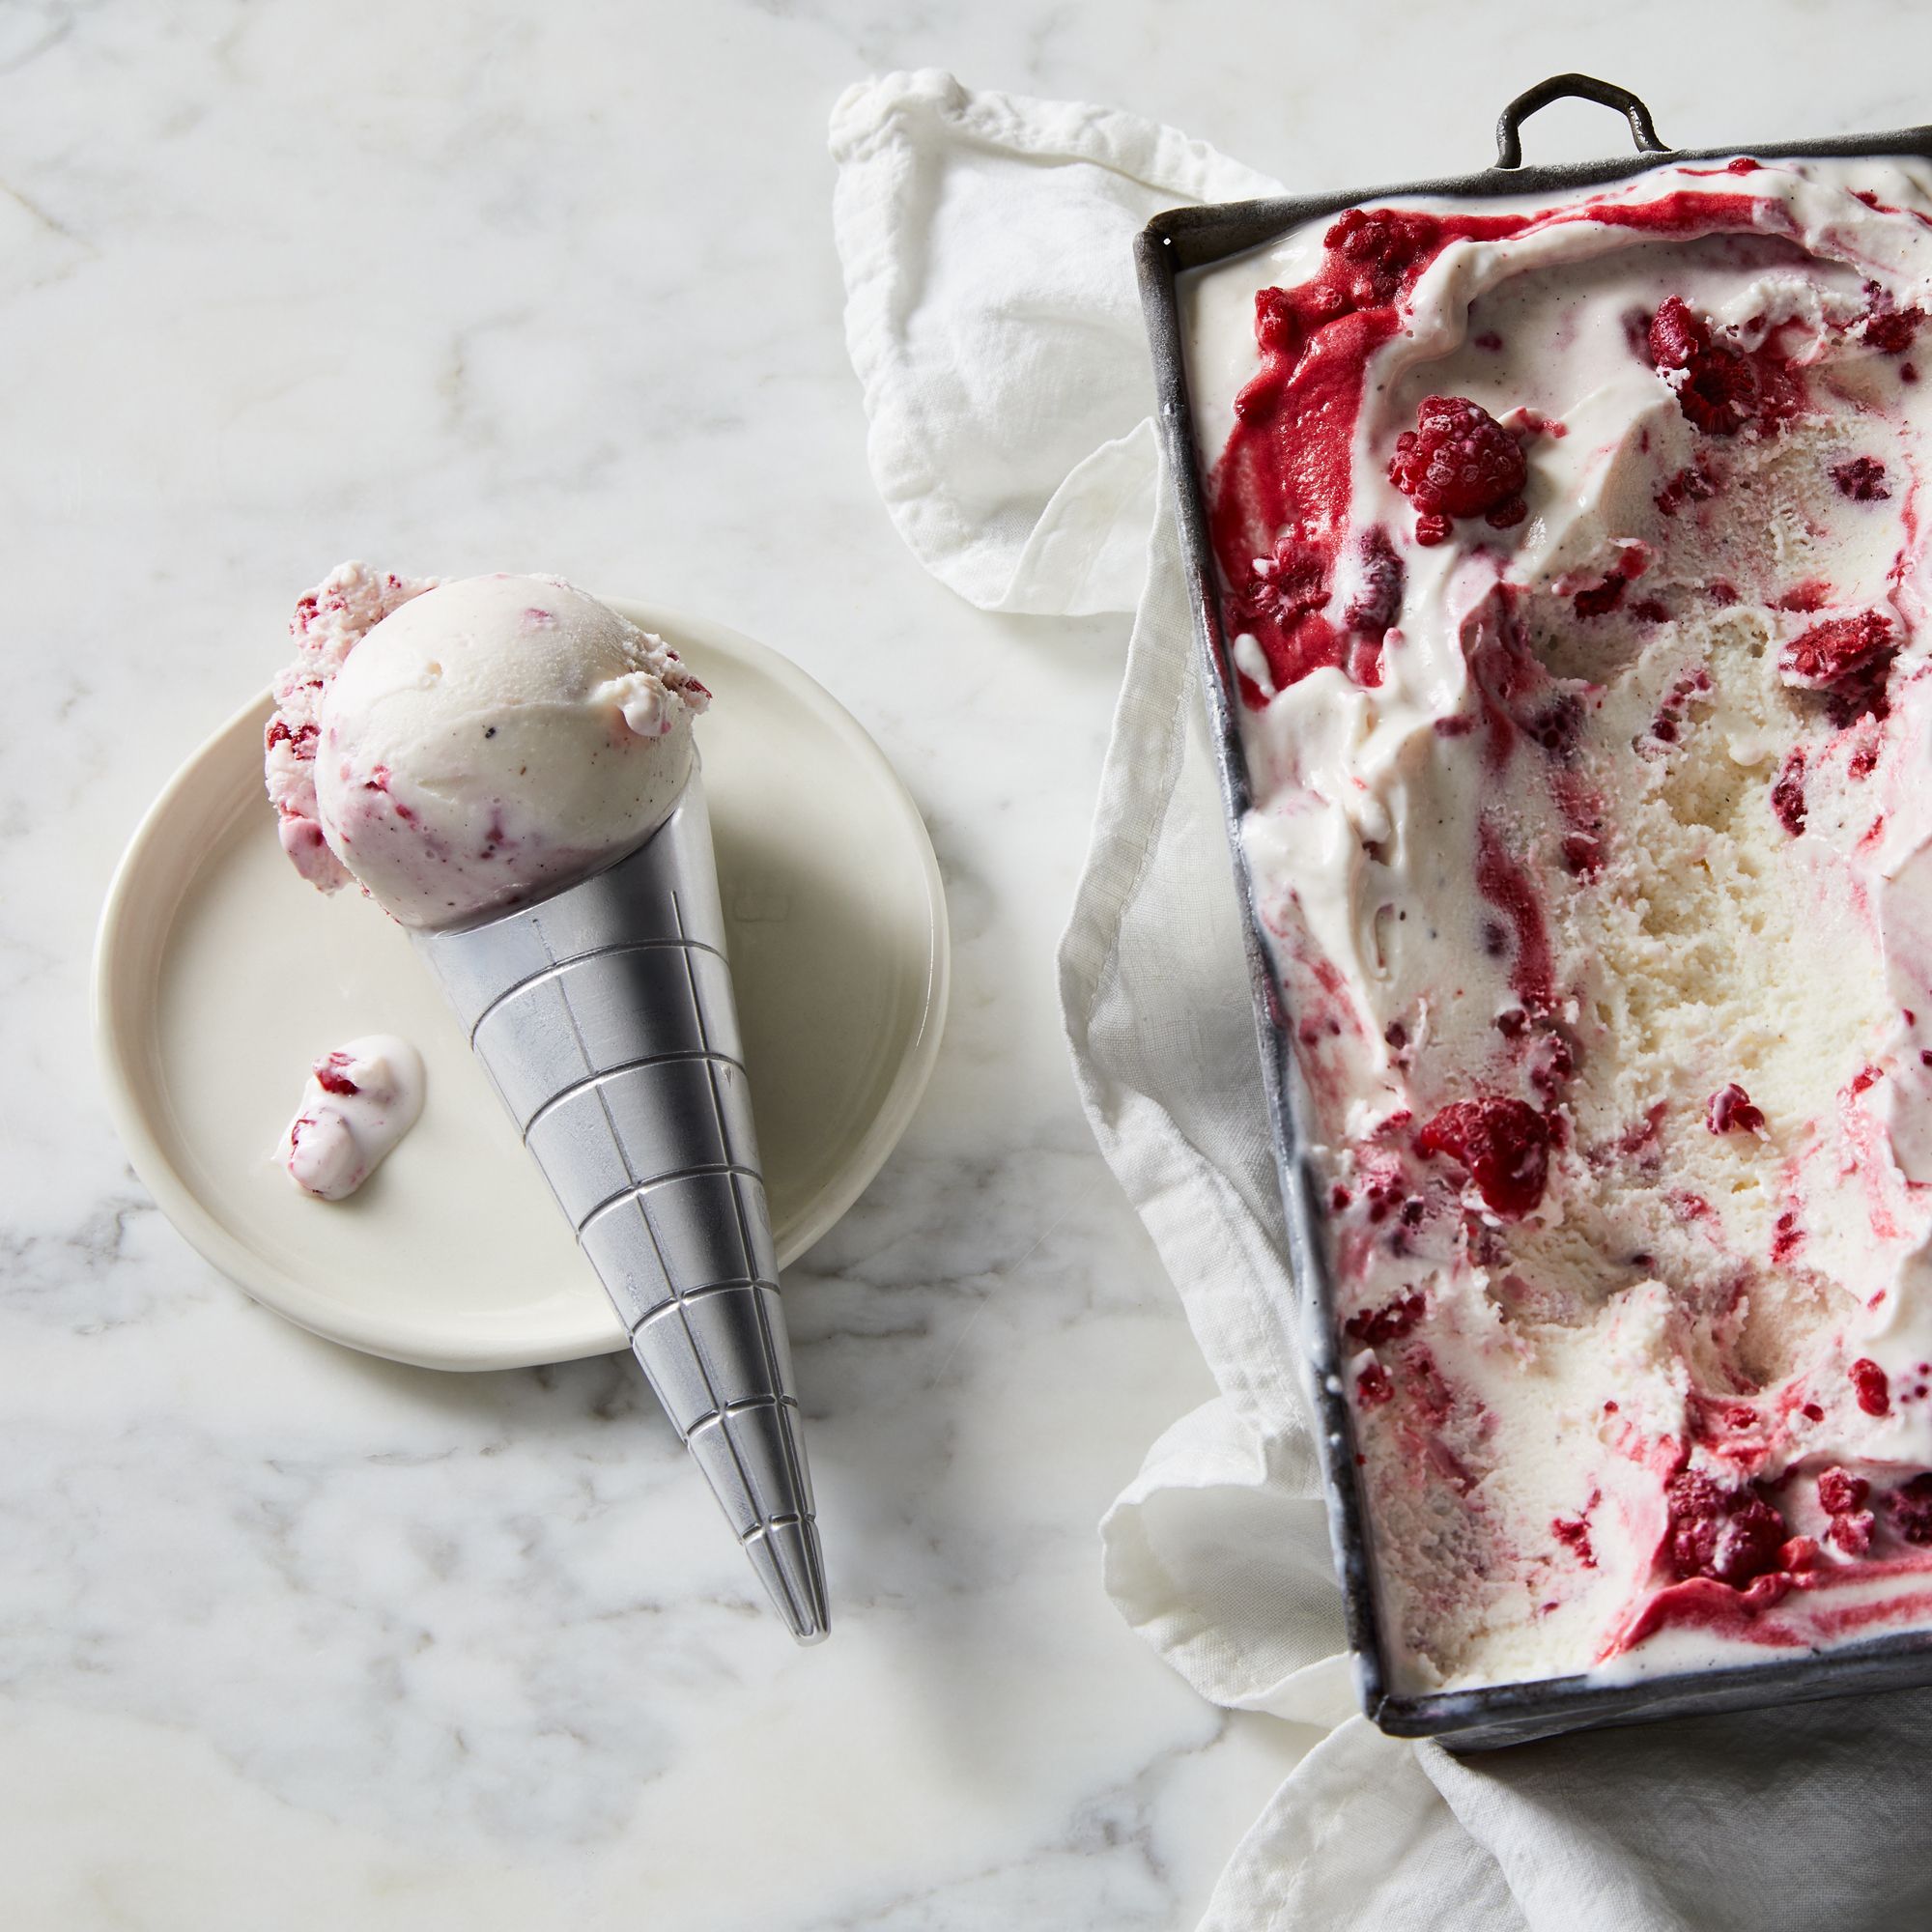 10 Ice Cream Makers and Accessories That Will Take Dessert to the